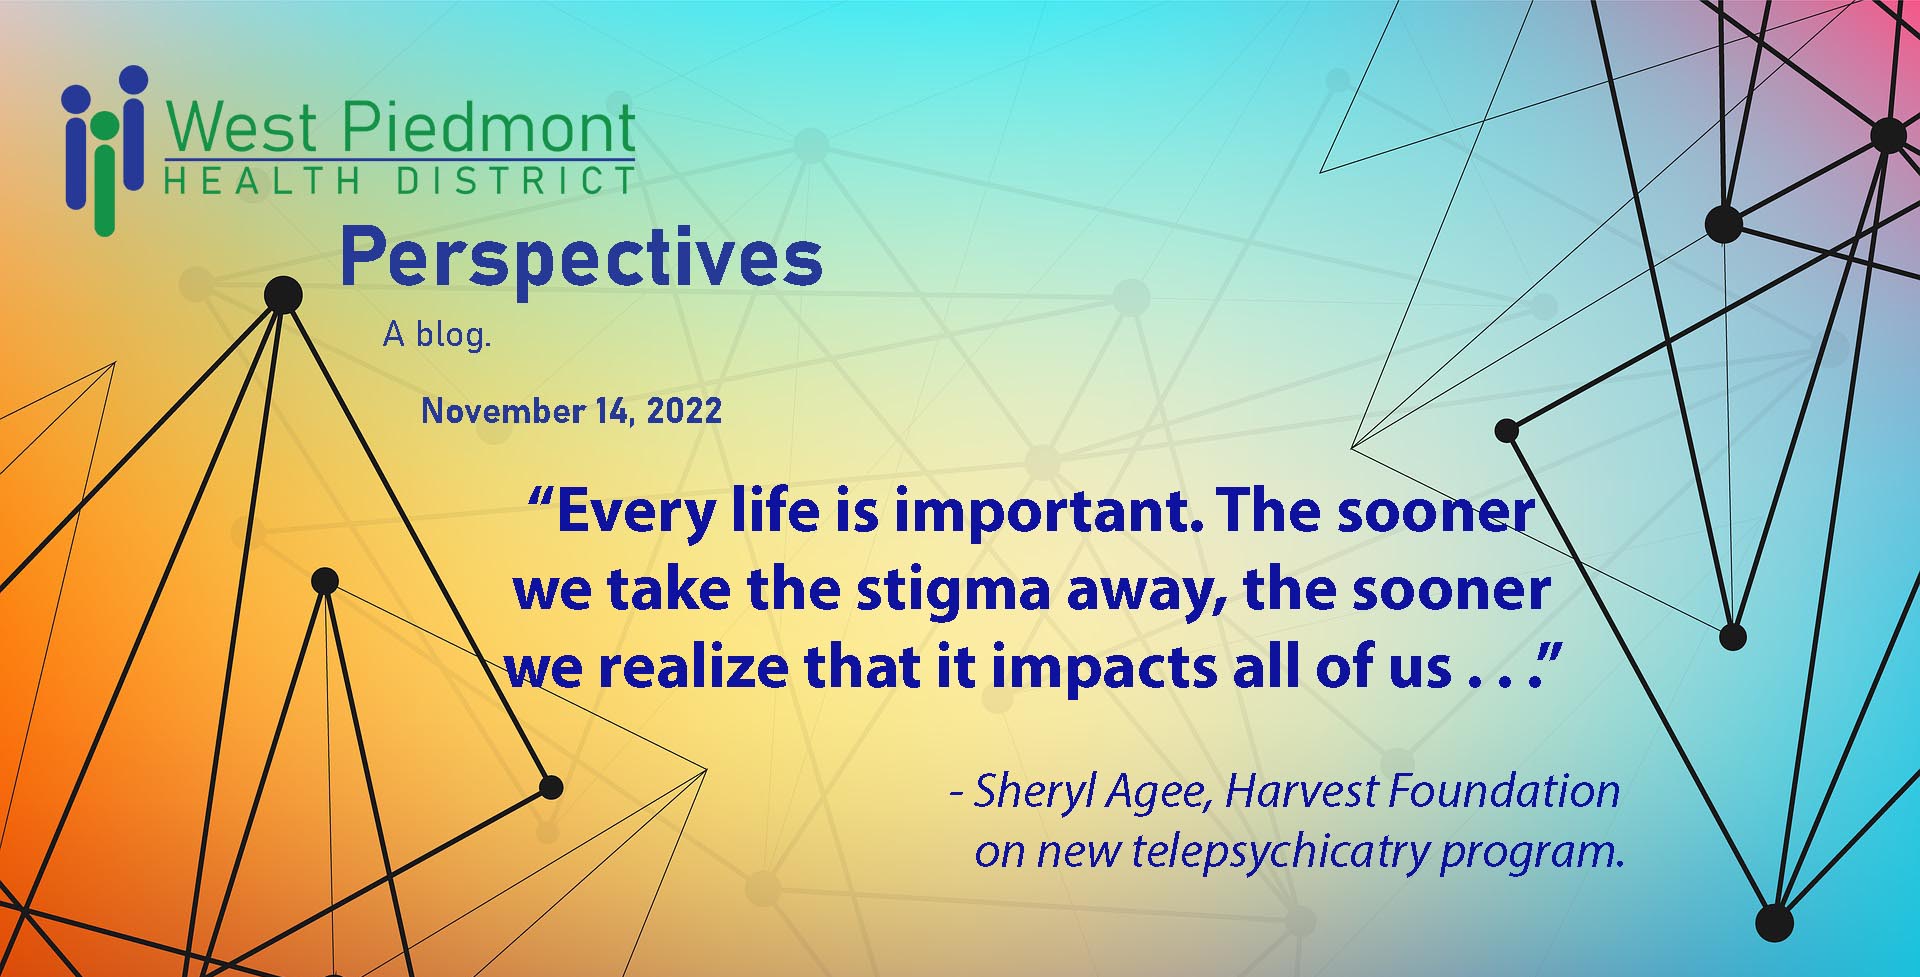 WP Perspectives cover quote: Every life is important. The sooner we take the sitgma away, the sooner we realize that it impacts all of us." Sheryl Agee, Harvest Foundation